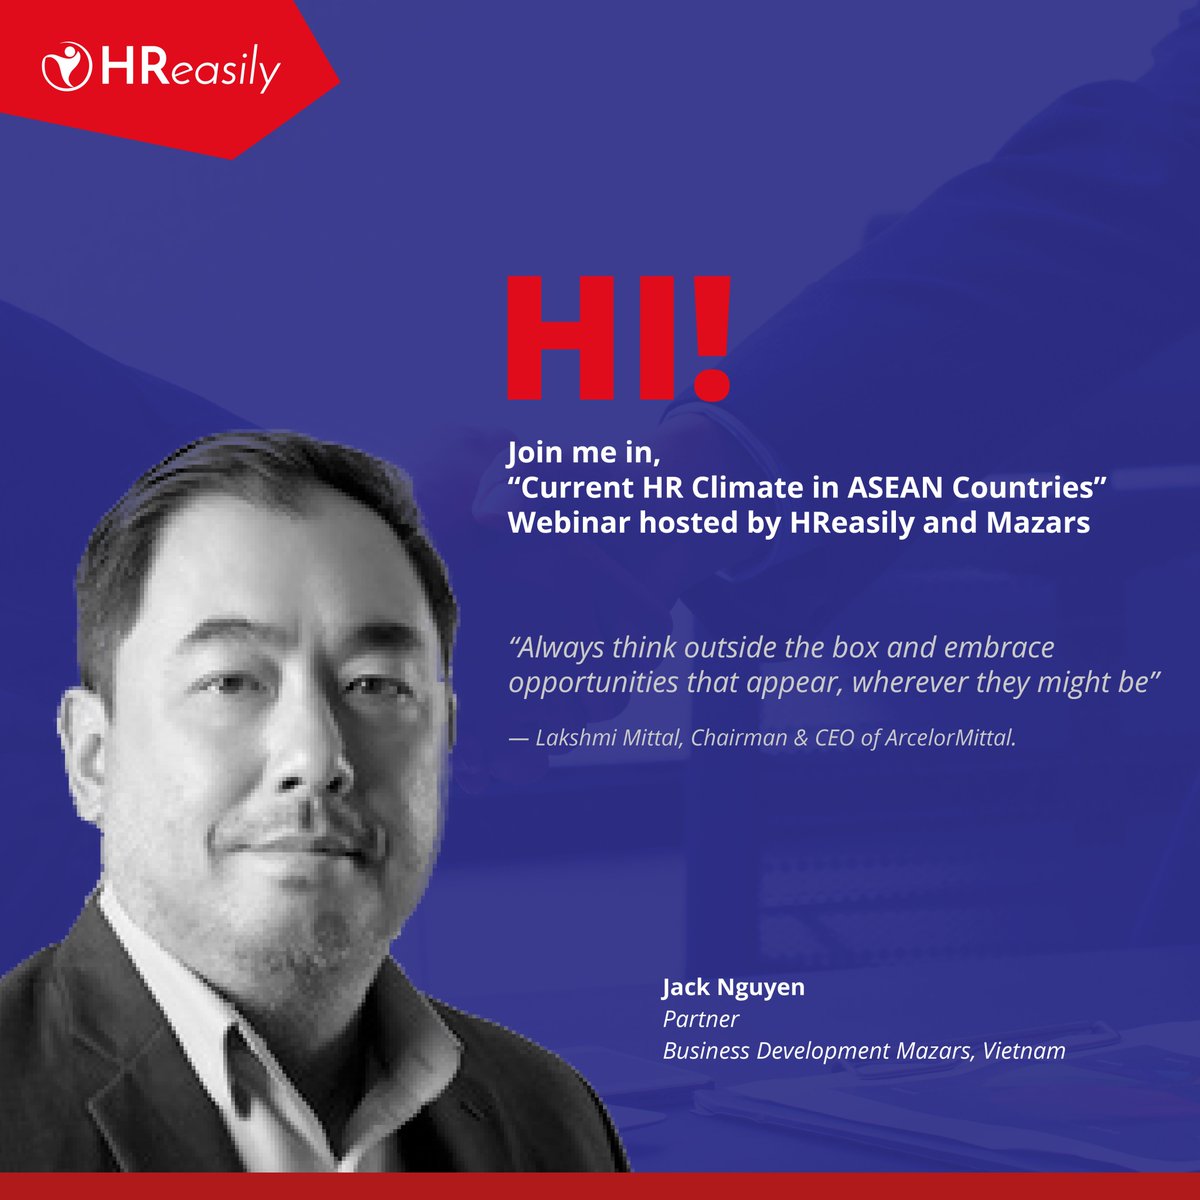 Catch Jack Nguyen alongside 5 other Mazars experts in “Current HR Climate in ASEAN Countries”, an engaging Webinar to discover the possibilities of permanent changes in the HR function. 📆 24th Feb ‘21, 3PM-4:30PM 📆 Secure your virtual seats here 👉🏽 bit.ly/2YVkCi0